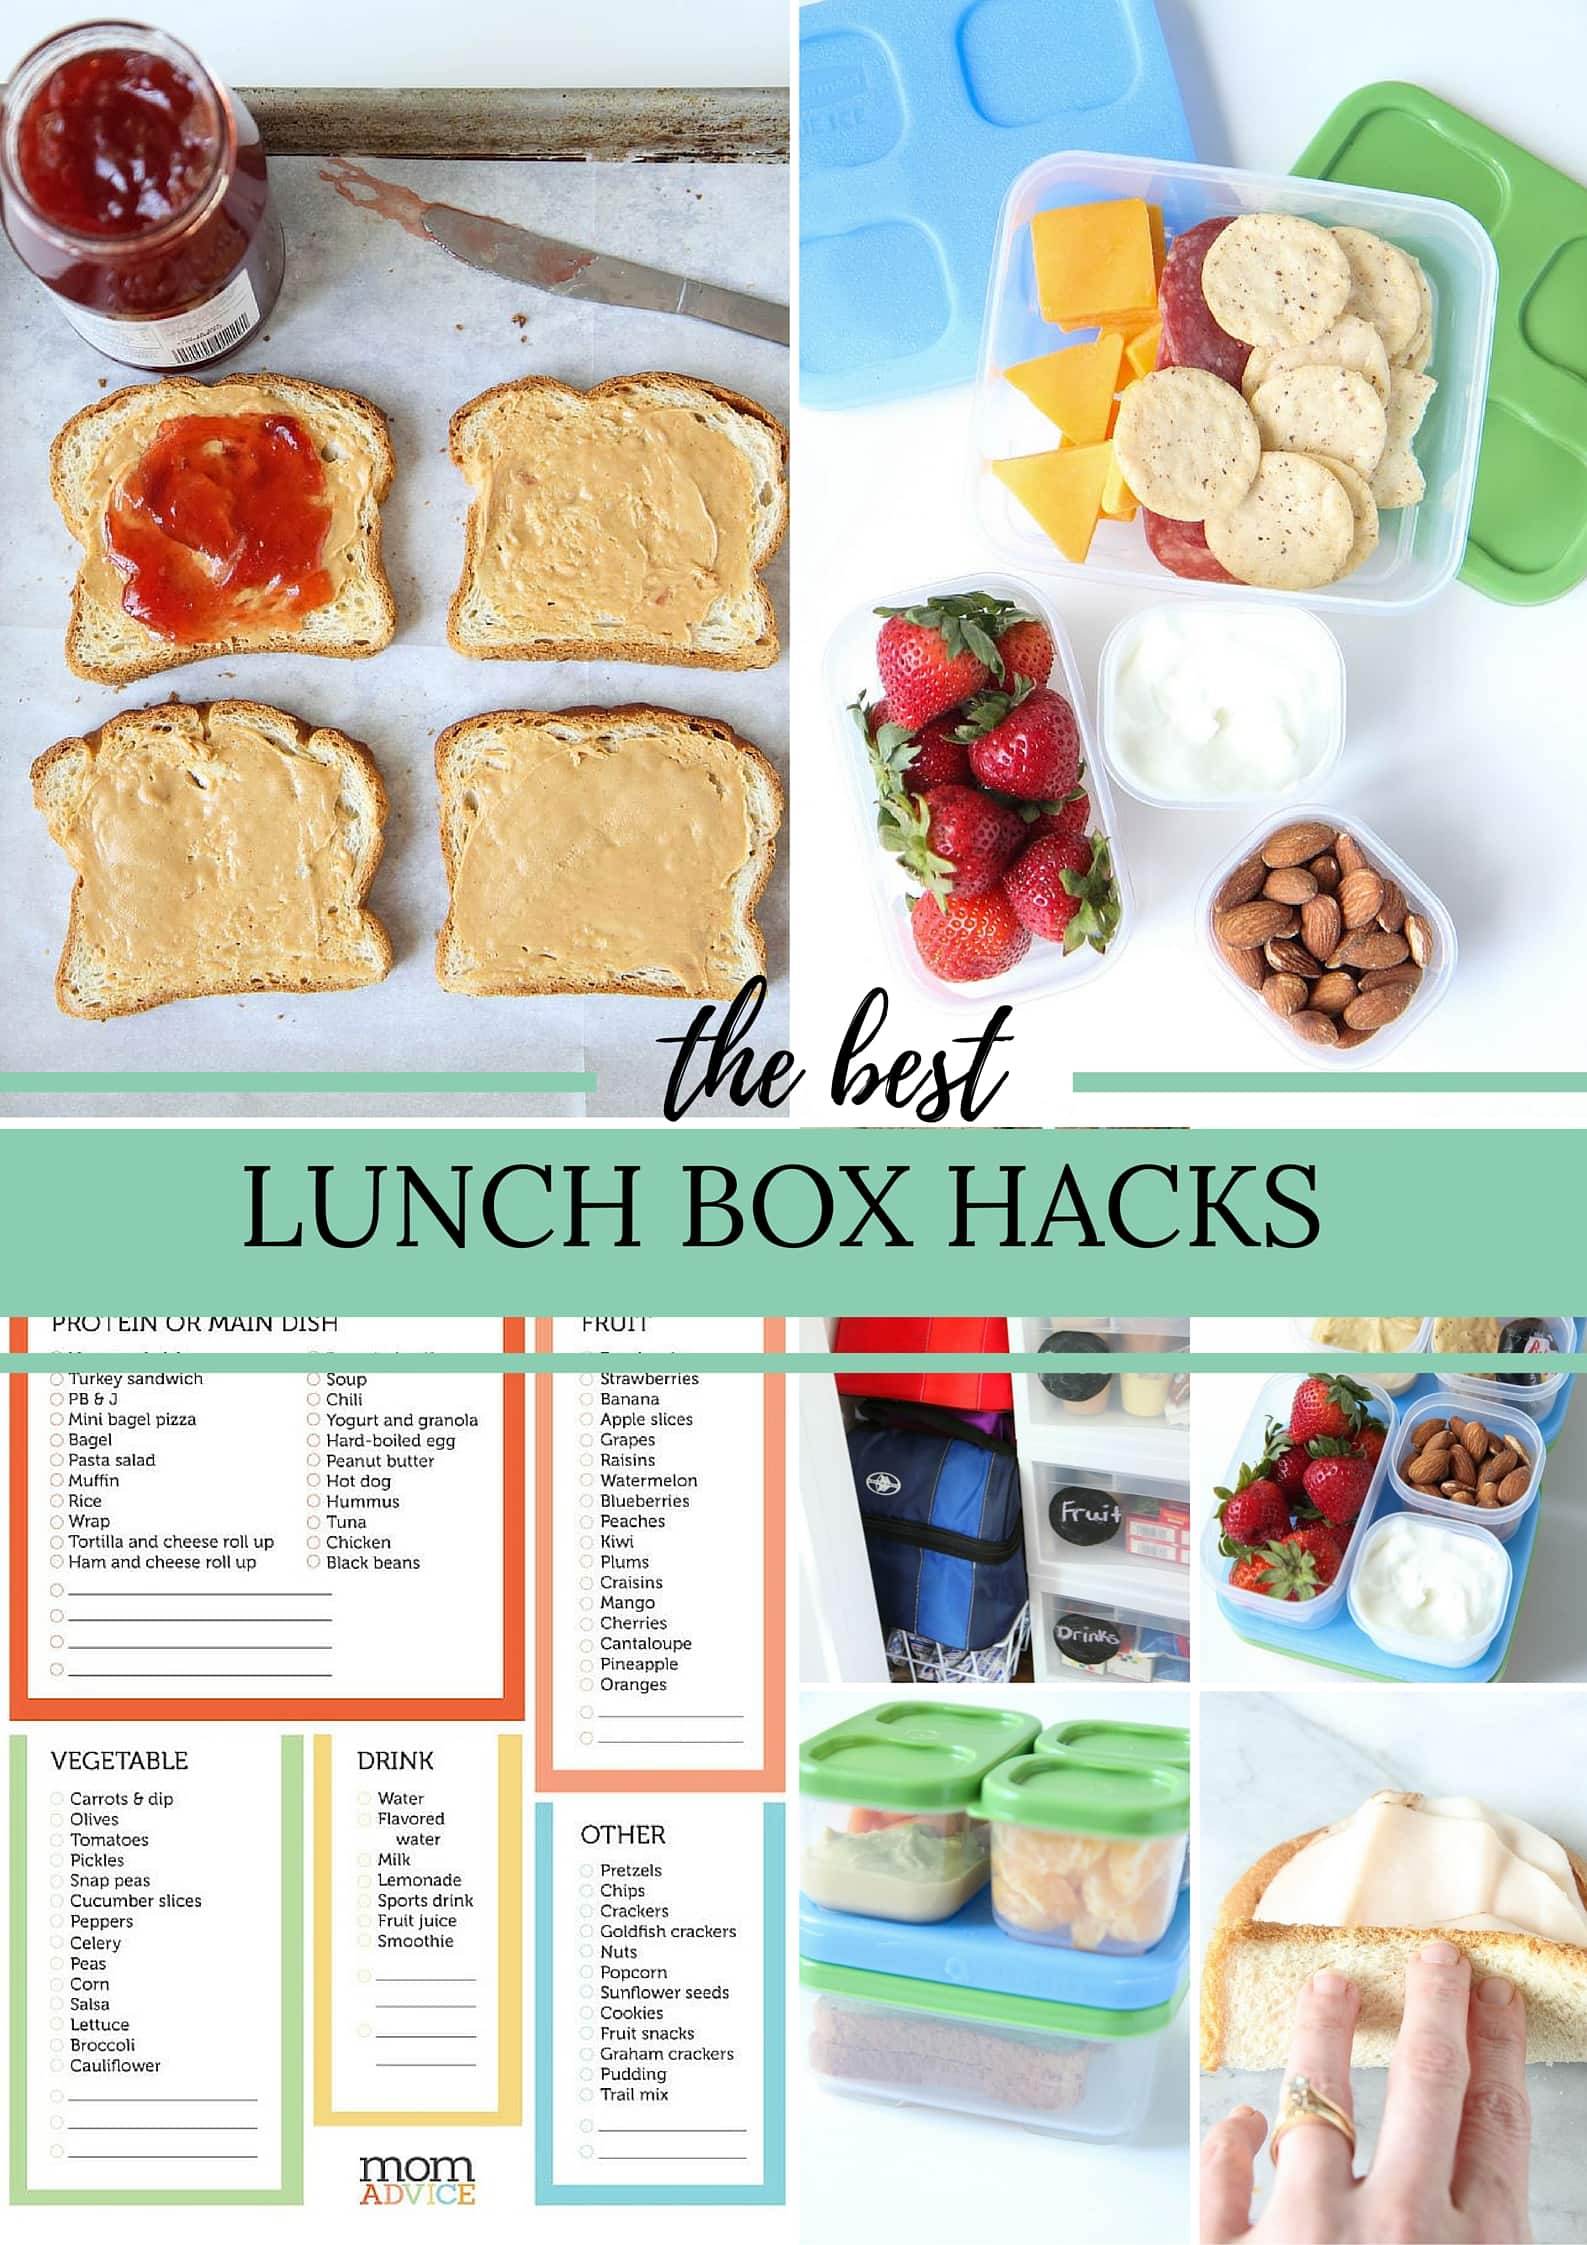 the-best-lunch-box-hacks MomAdvice.com